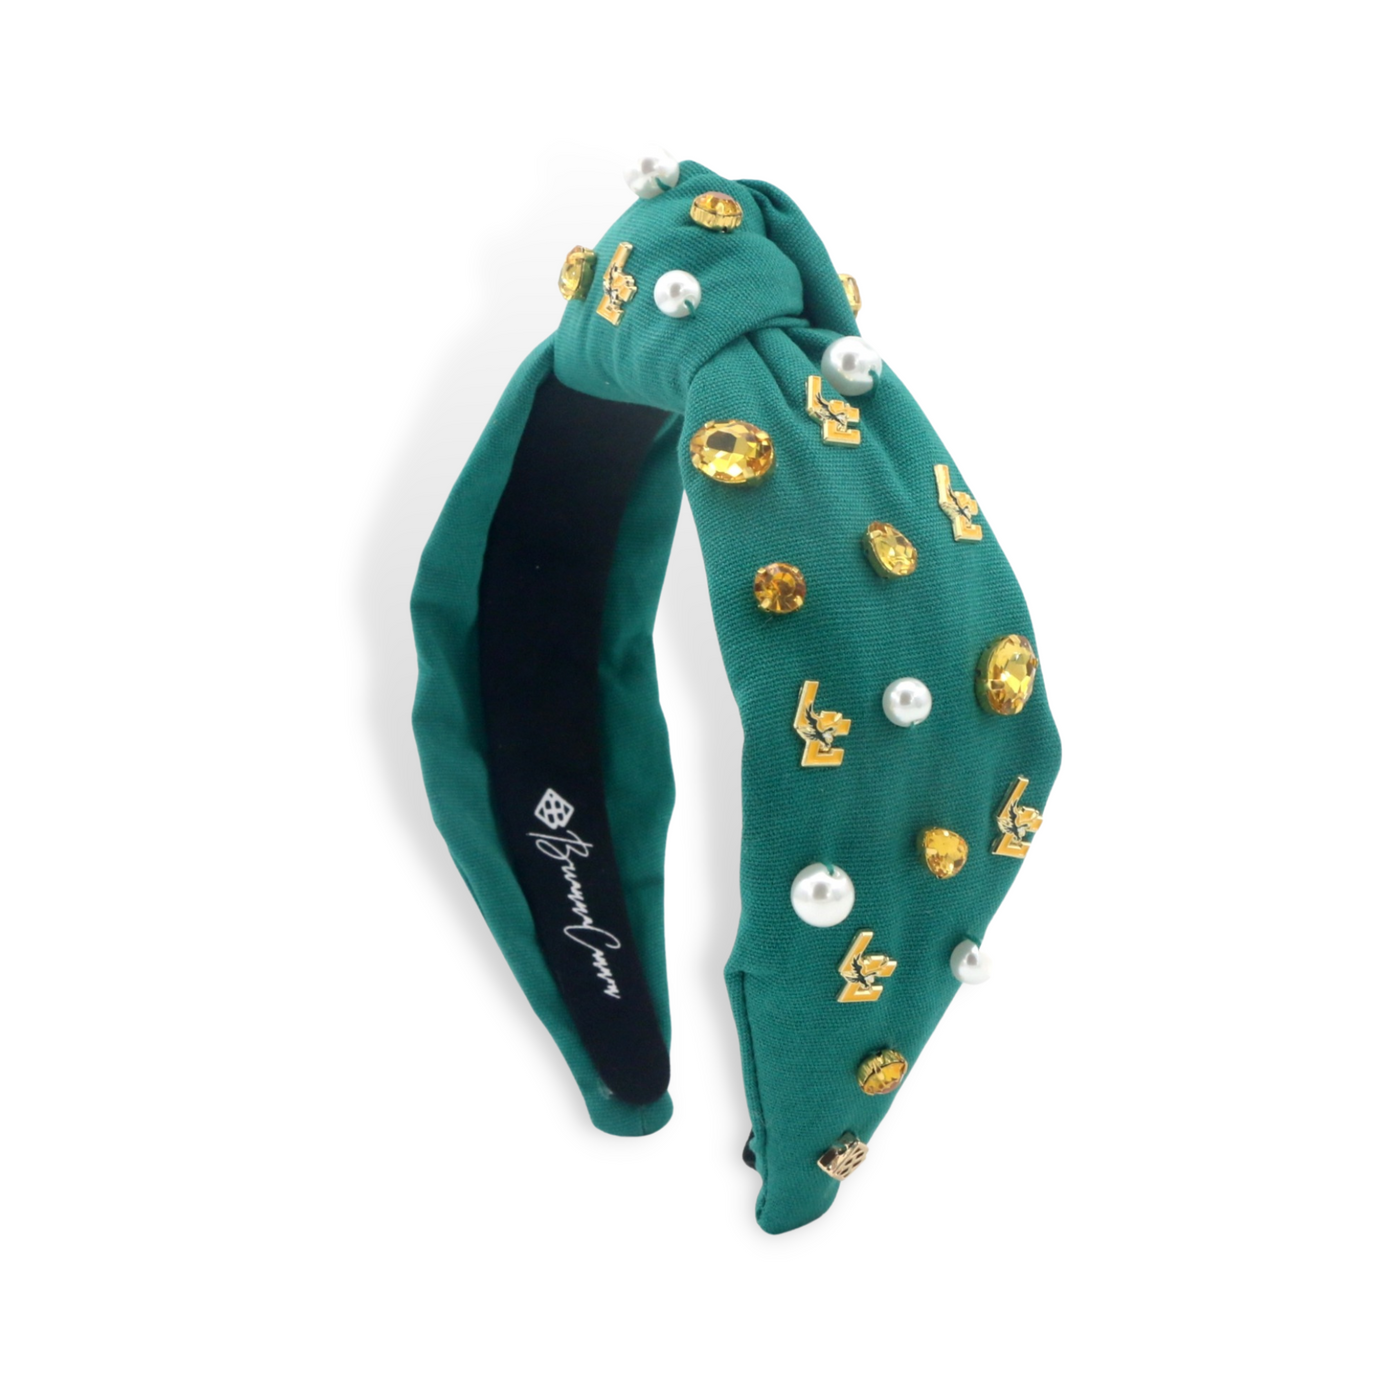 Adult Size Green LCA Logo Headband With Pearls and Crystals